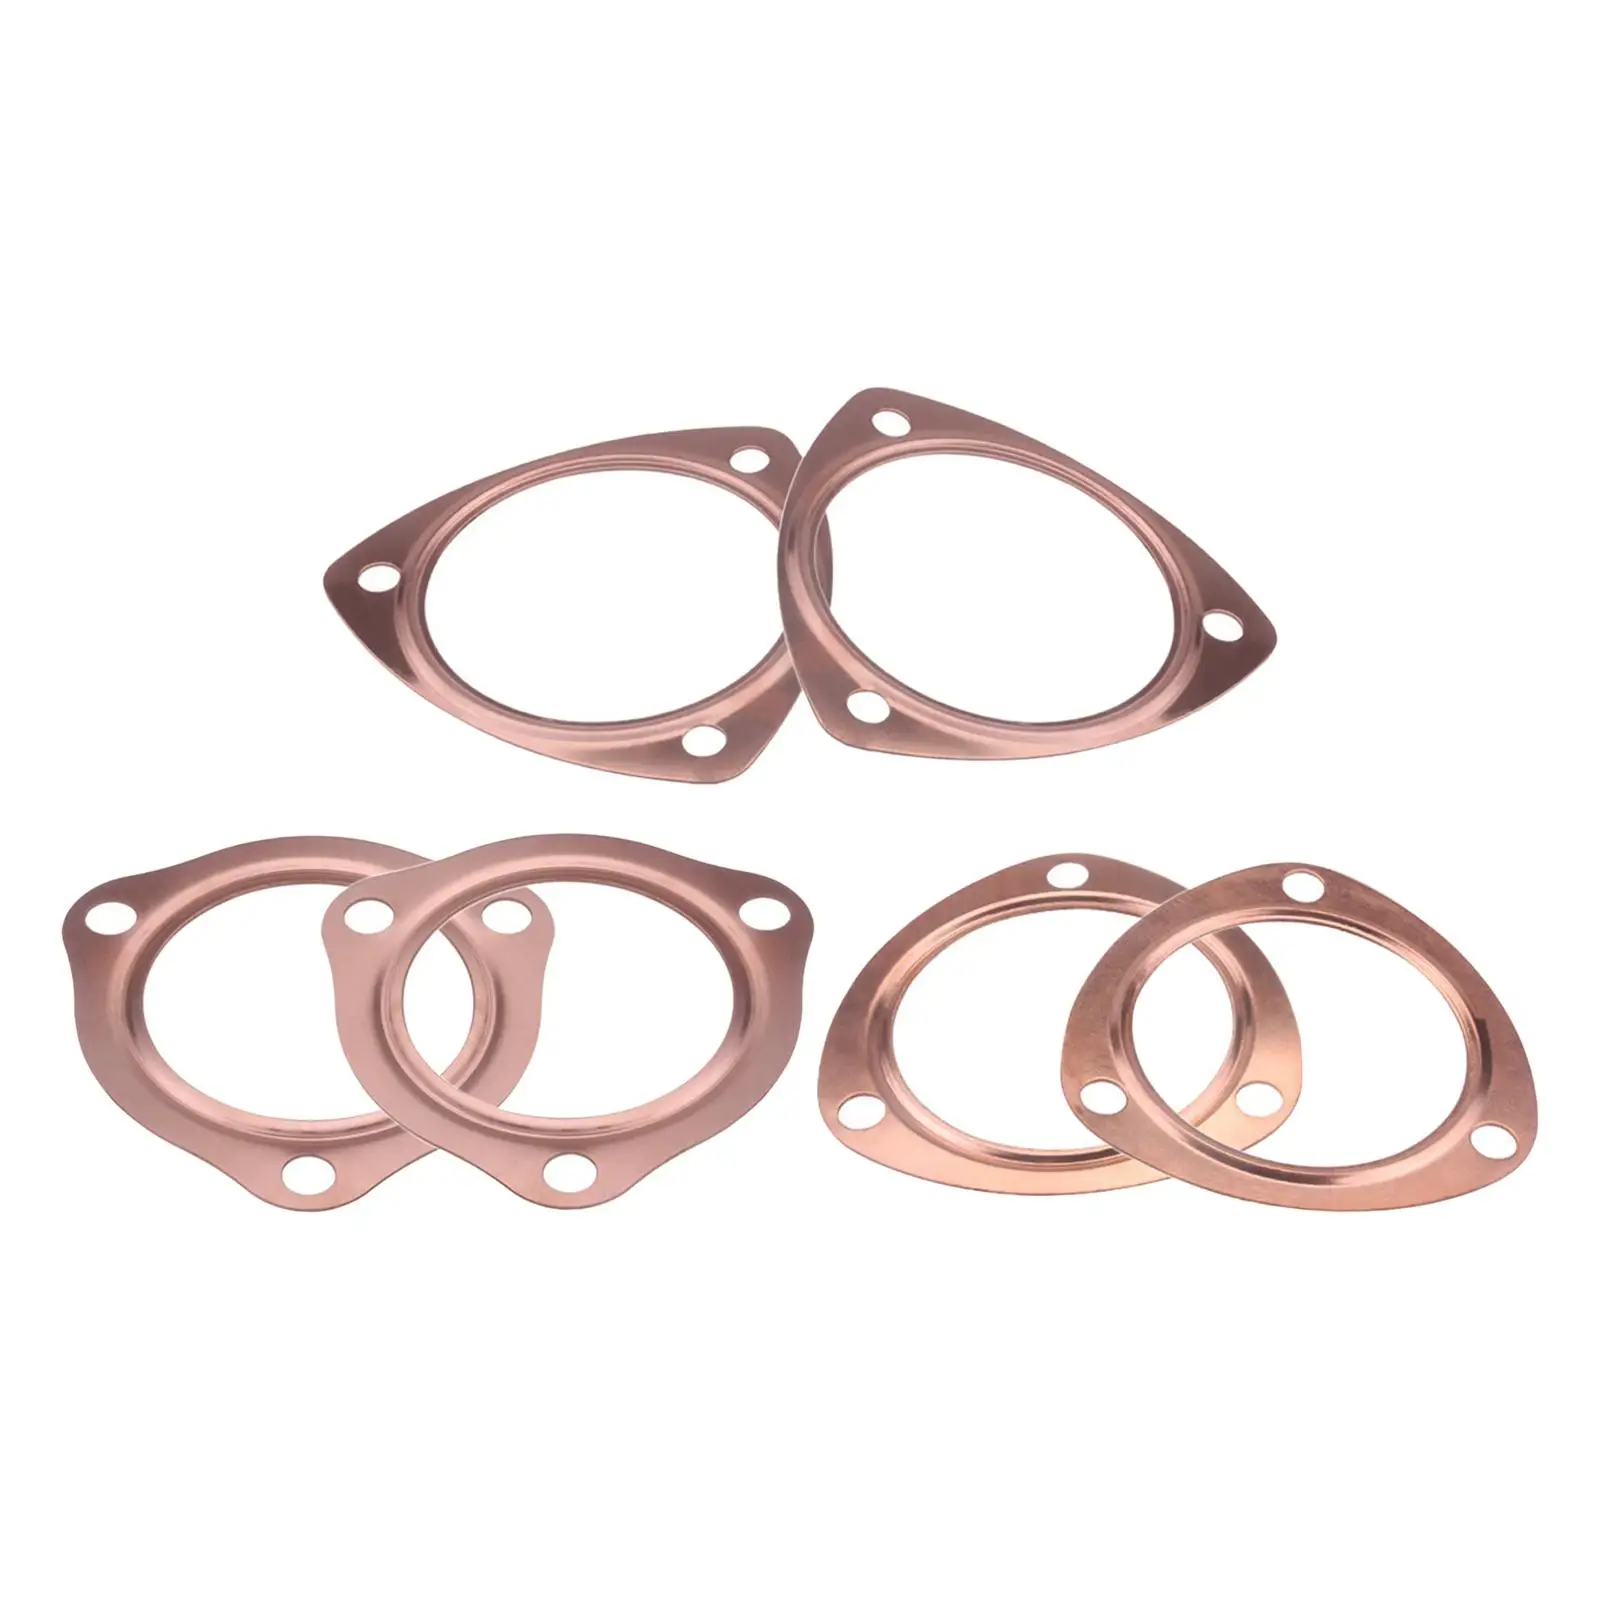 Header Collector Gaskets Colorfast Anti Scratch Durable Anti Strike for Sbc Bbc 302 350 454 Direct Replaces Automotive